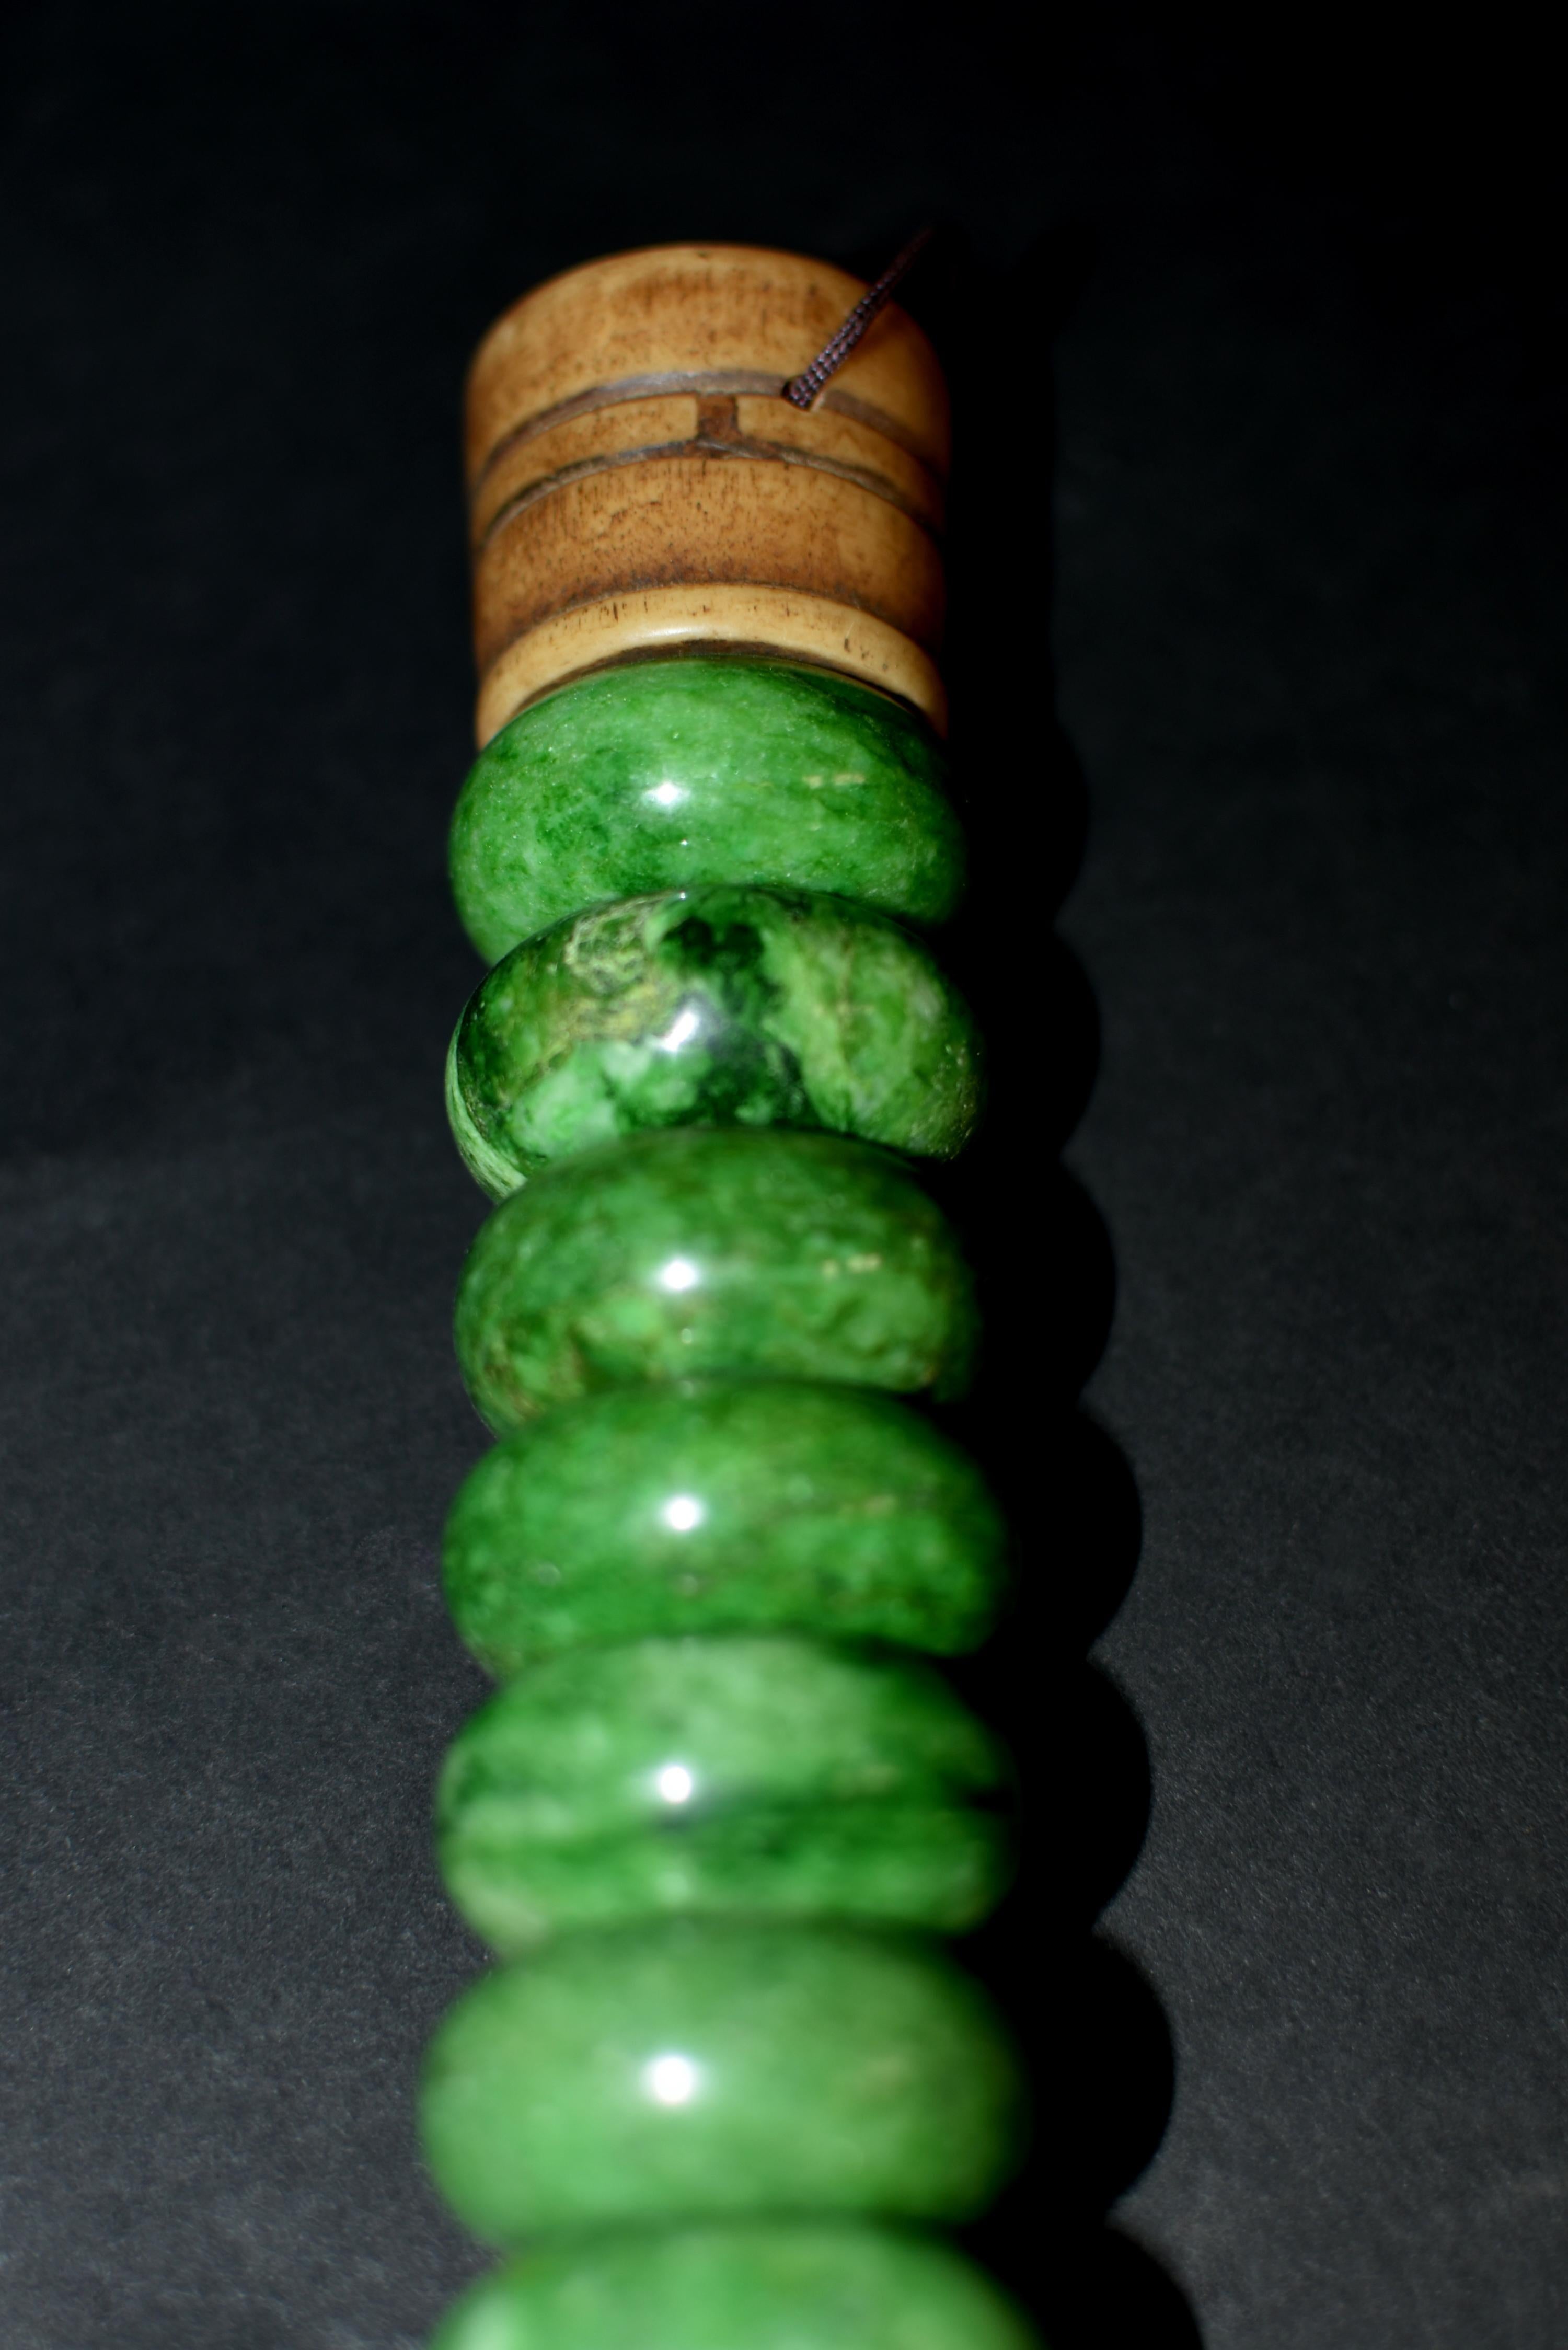 Chinese Calligraphy Brush Large Green Marble Bead 4